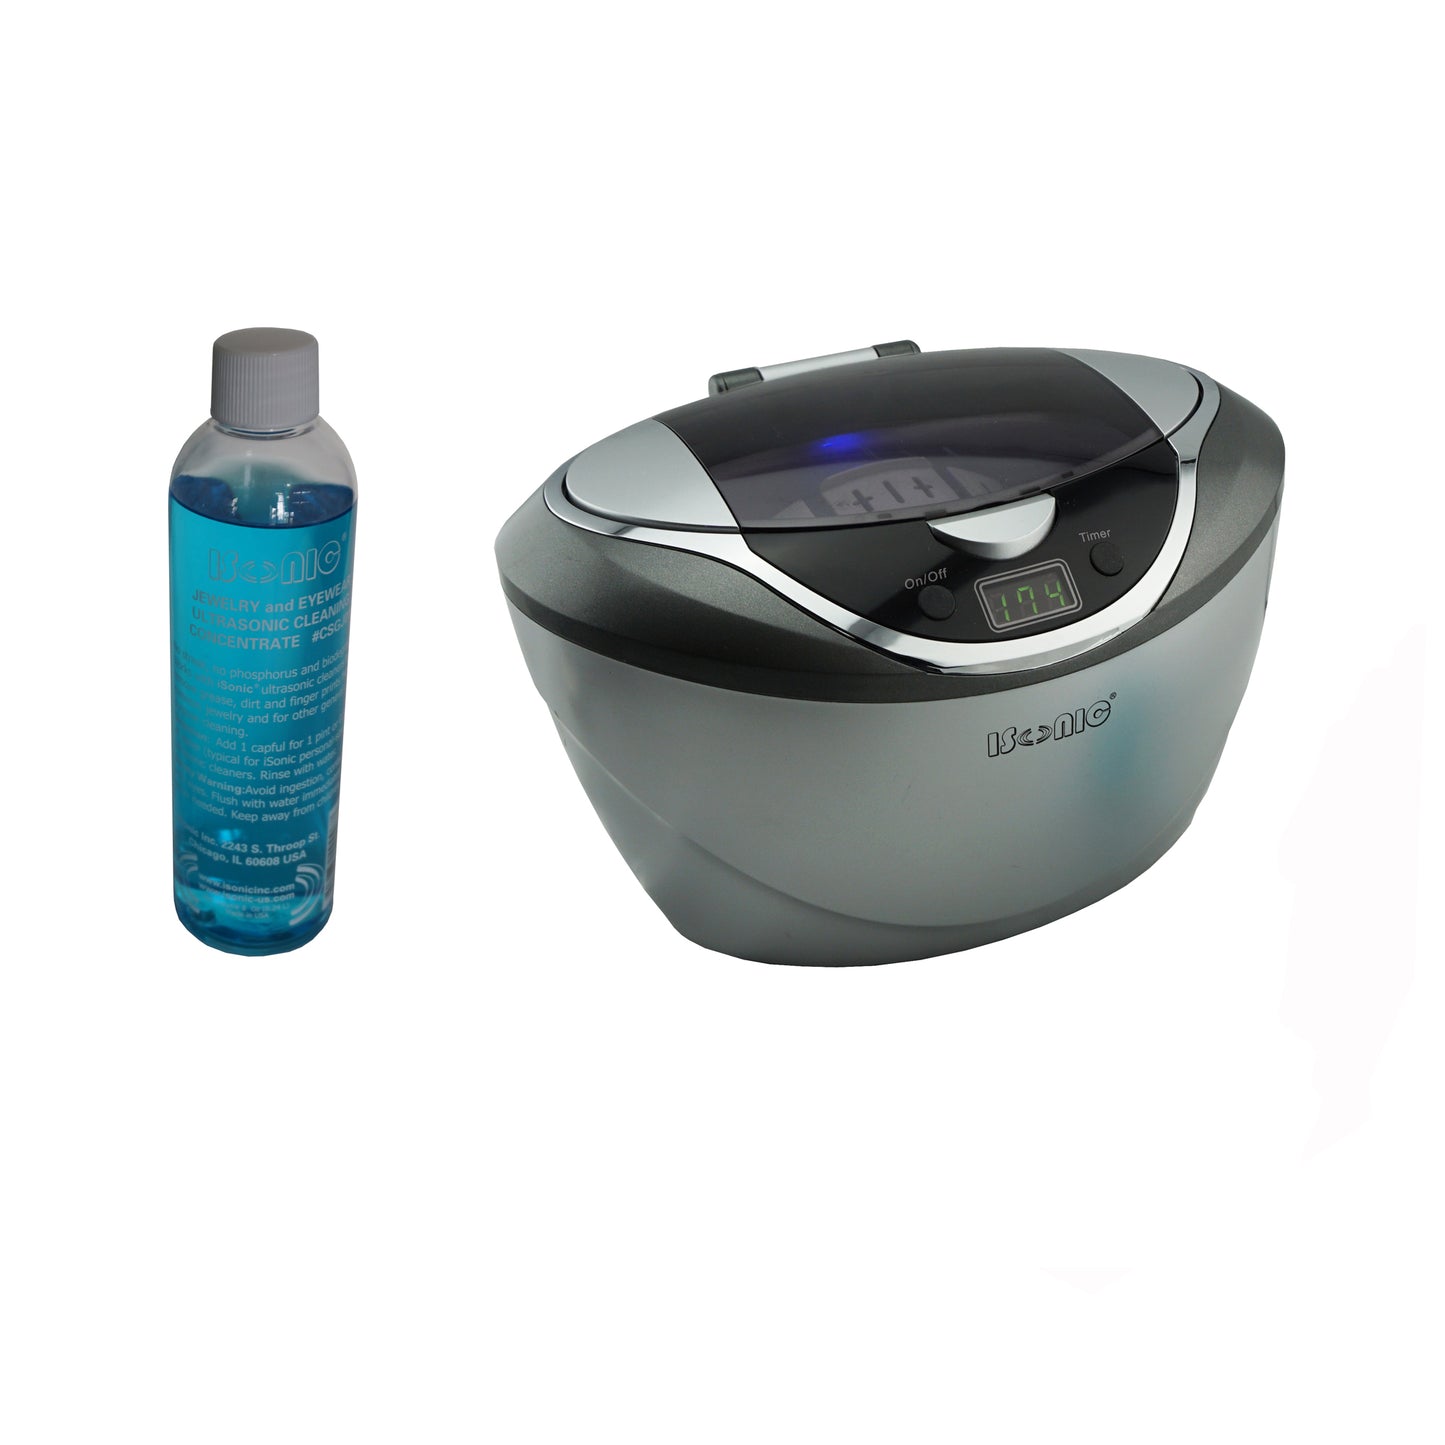 D2840+CSGJ01 | iSonic® Digital Ultrasonic Cleaner, with Jewelry/Eyewear Cleaning Solution Concentrate CSGJ01, 8OZ, Promotional Price!